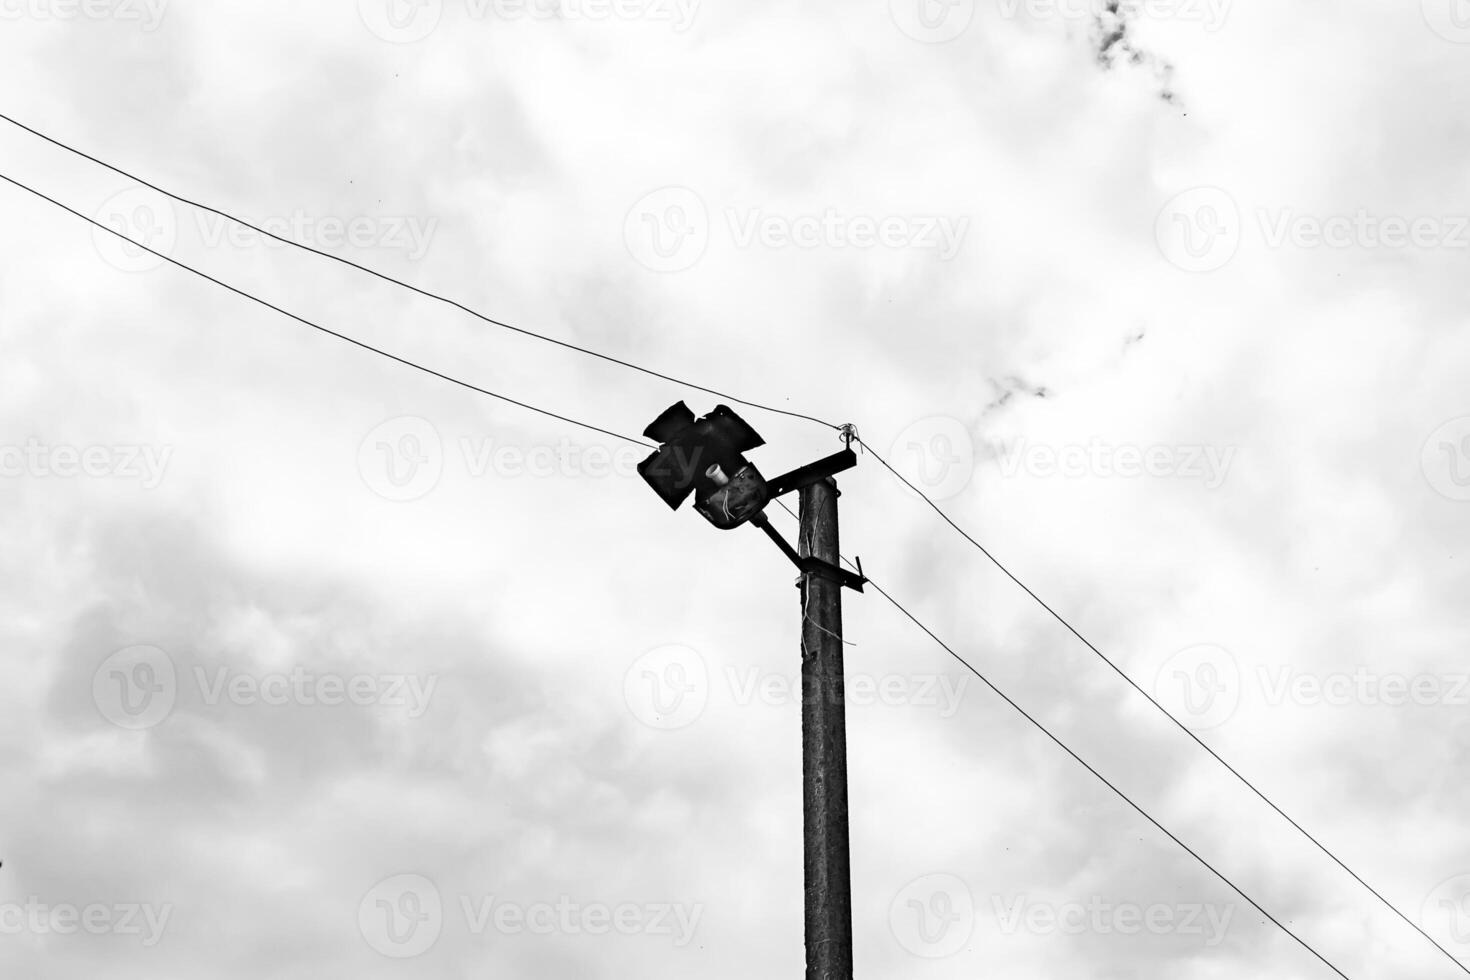 Power electric pole with line wire on dark background close up photo